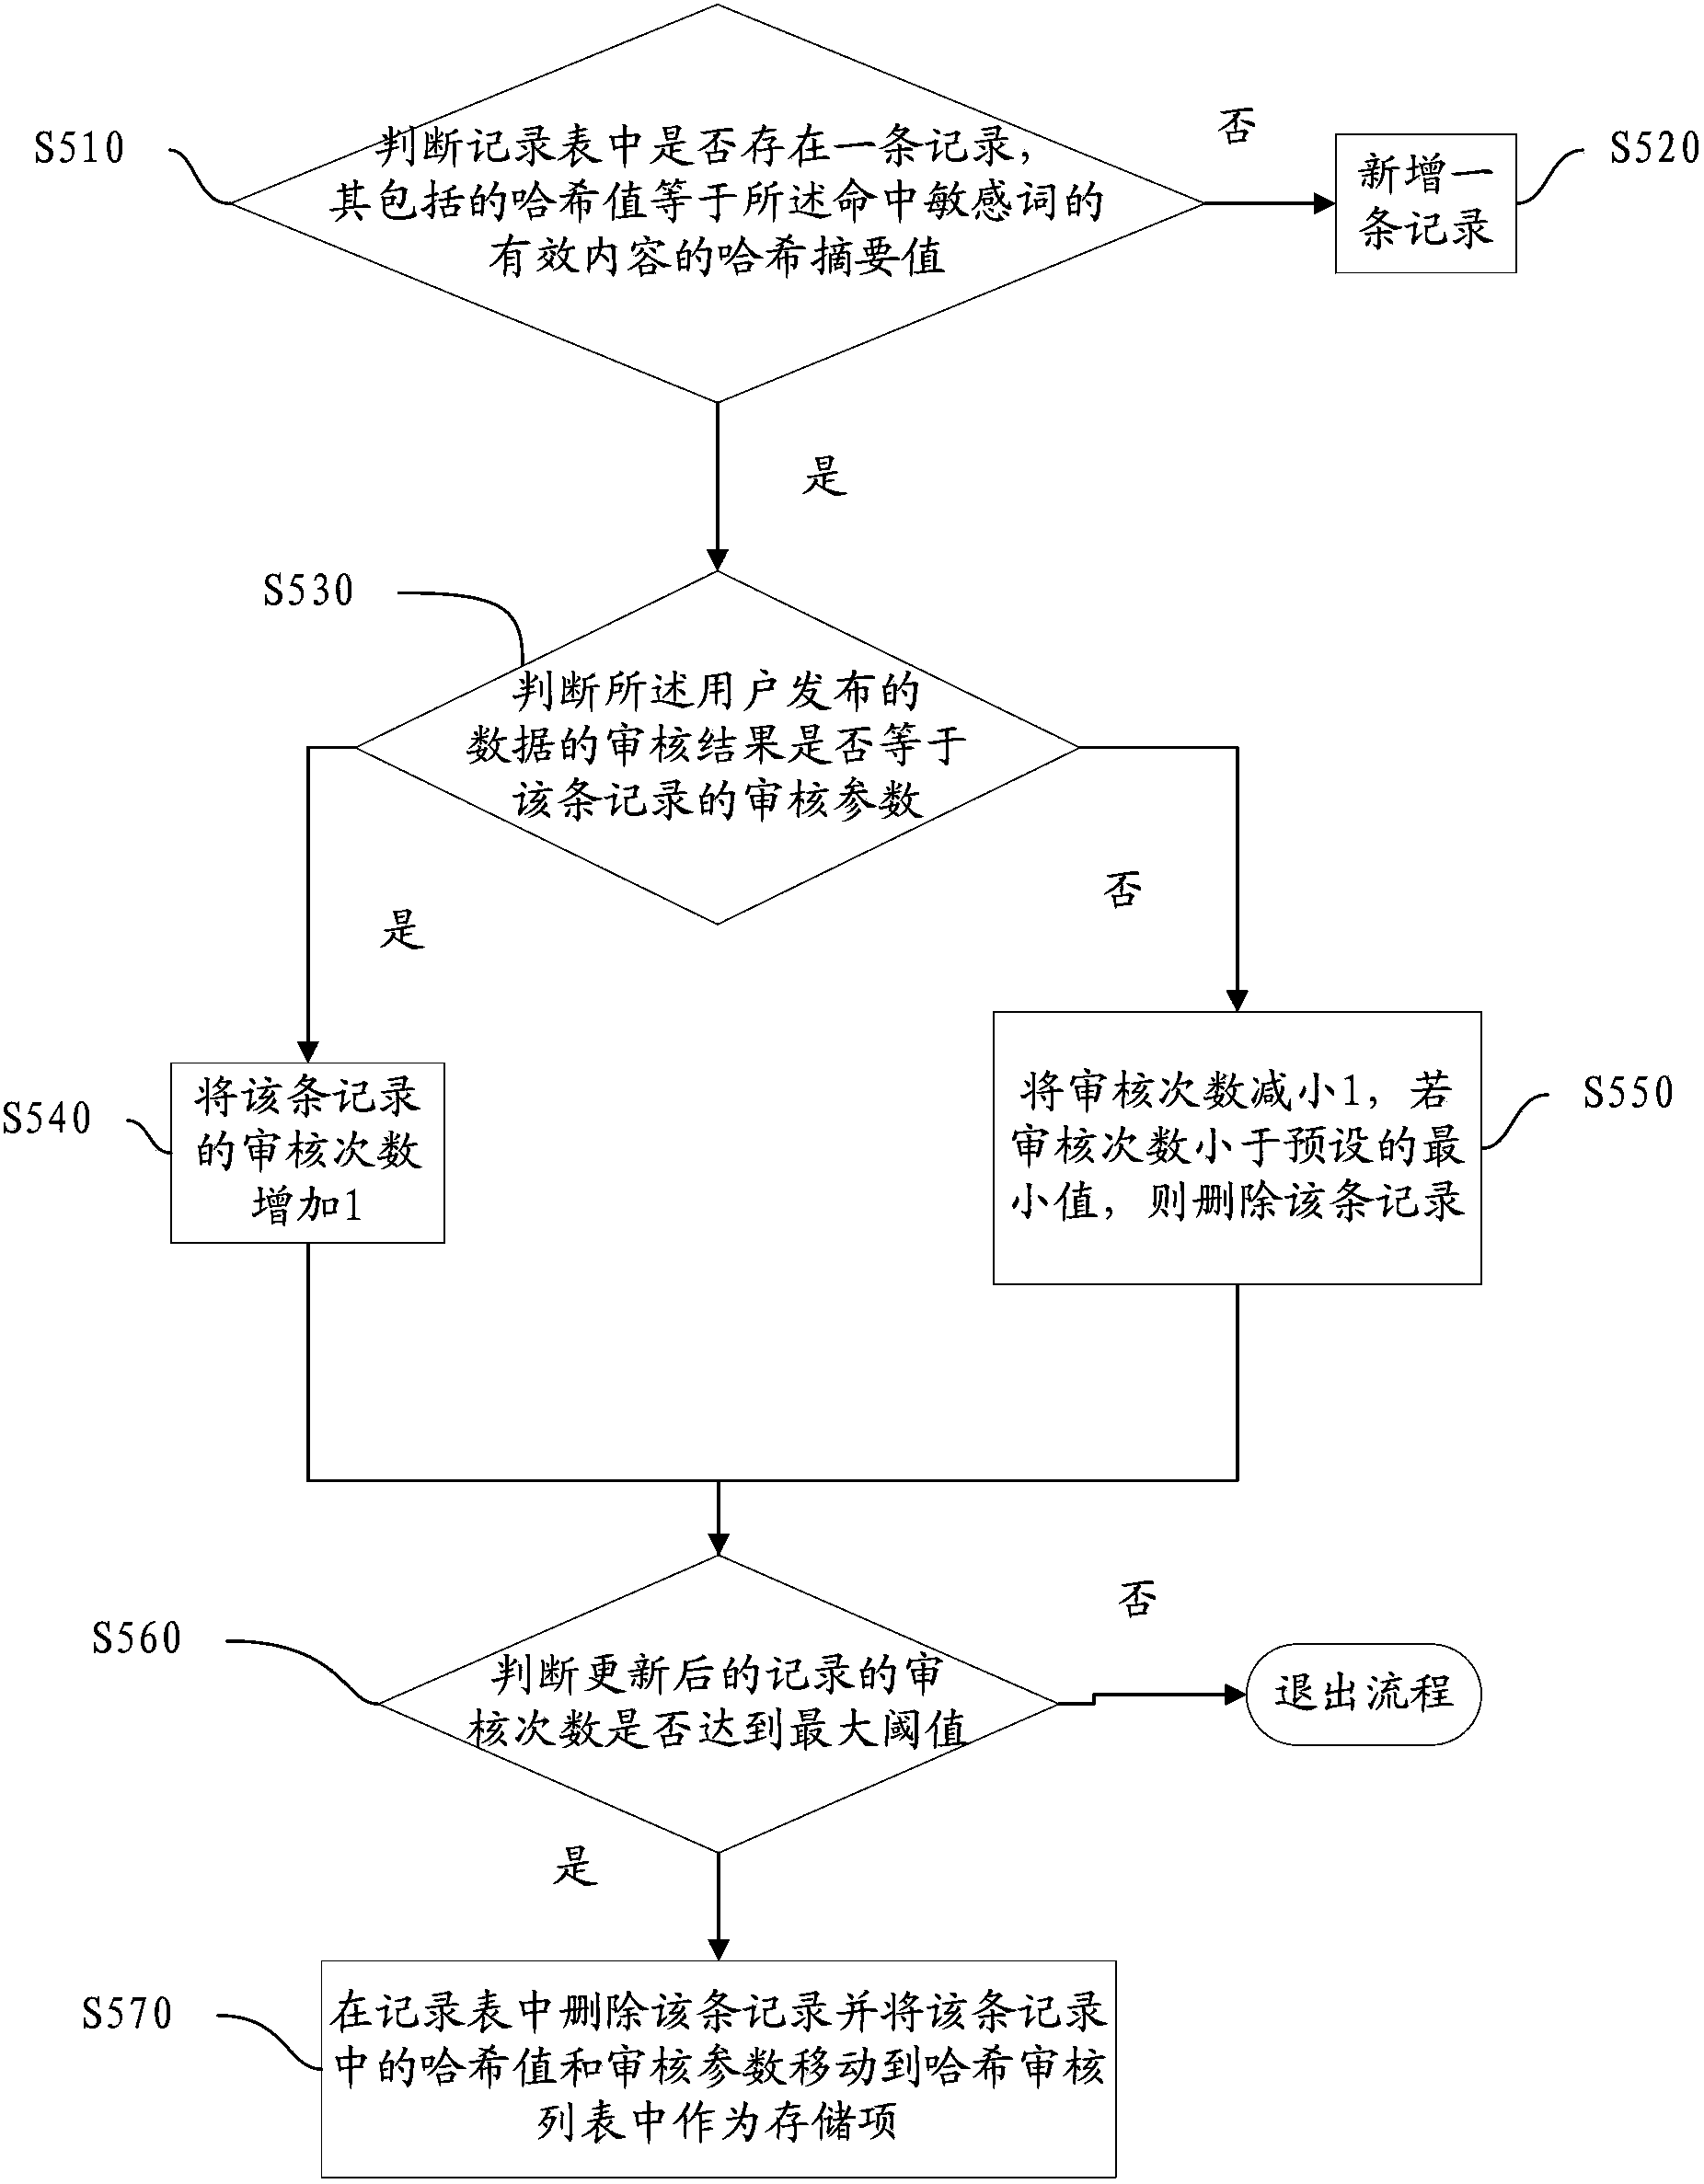 Content checking method and system